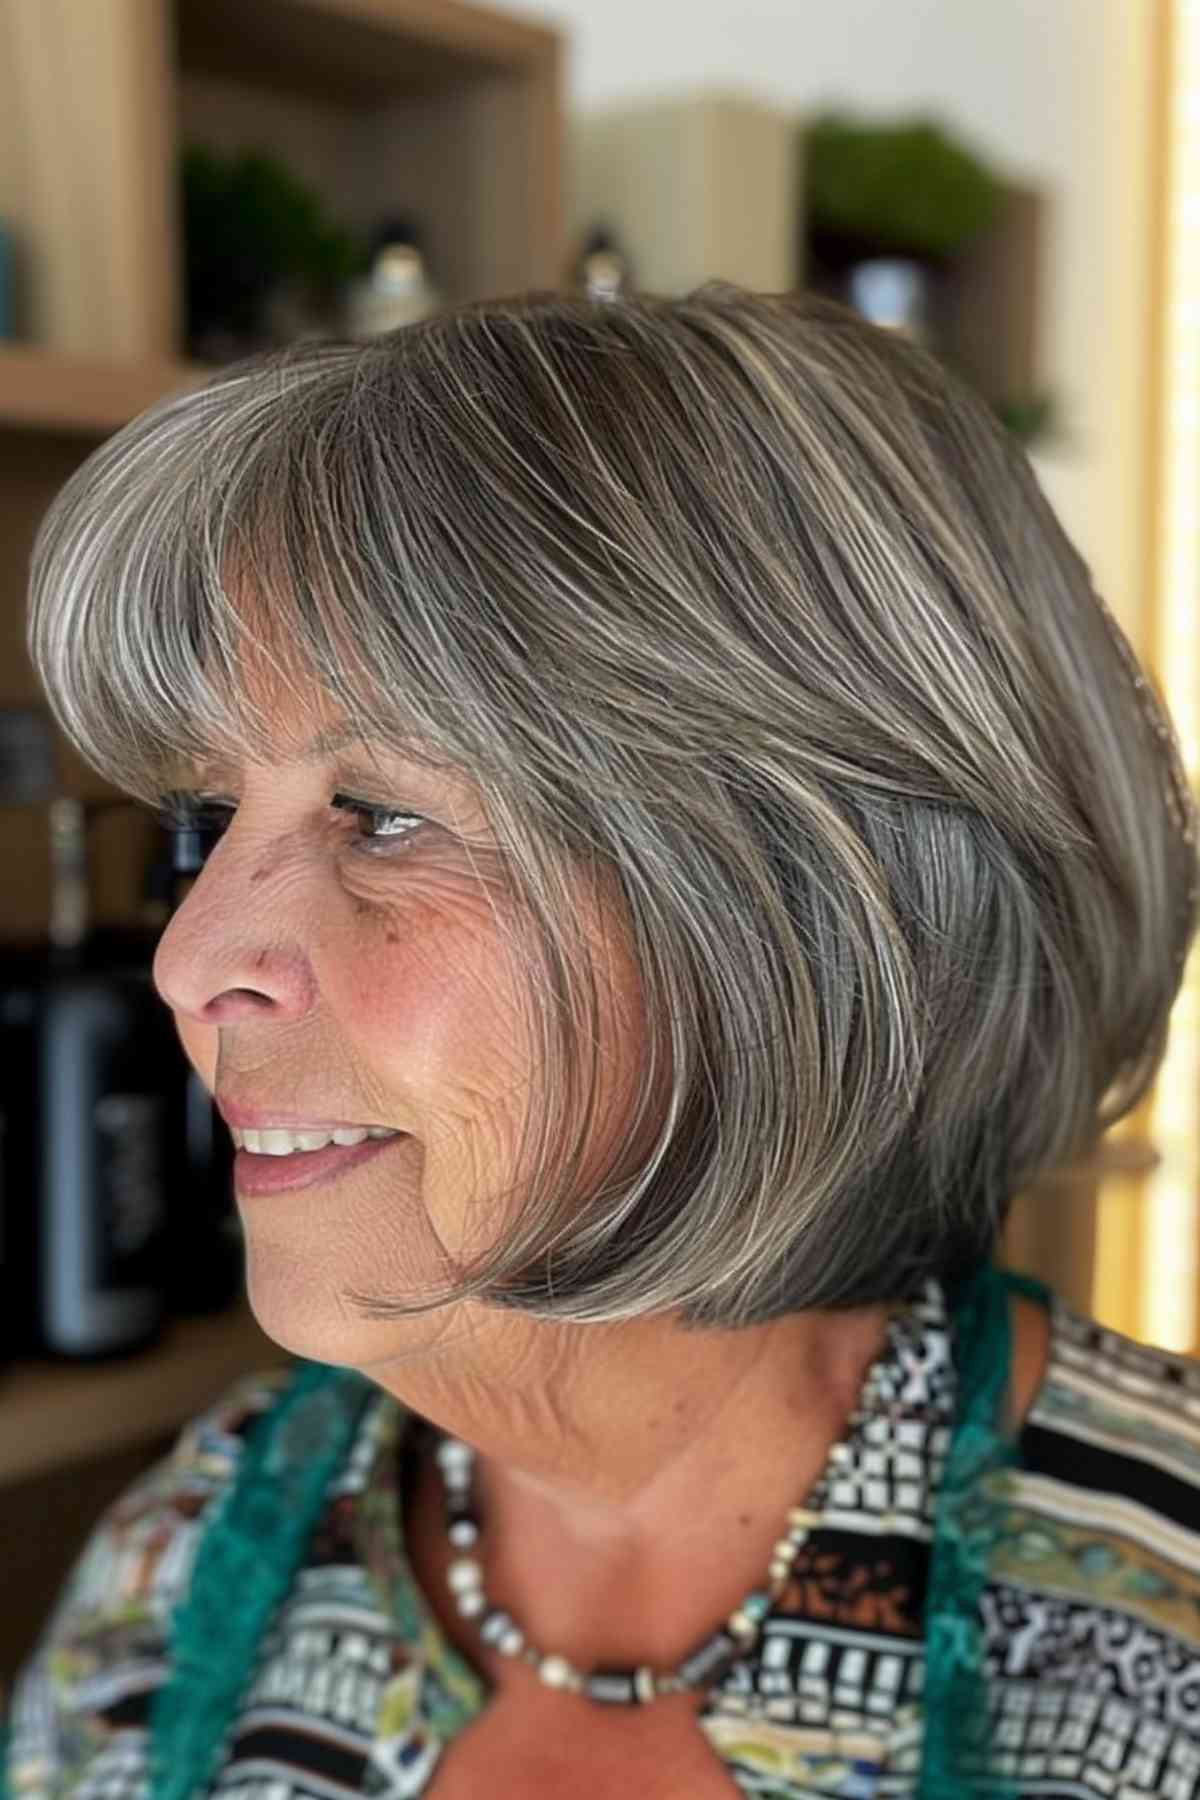 Sophisticated mature woman with glamorous grey hair and chic bangs that complement her natural elegance.